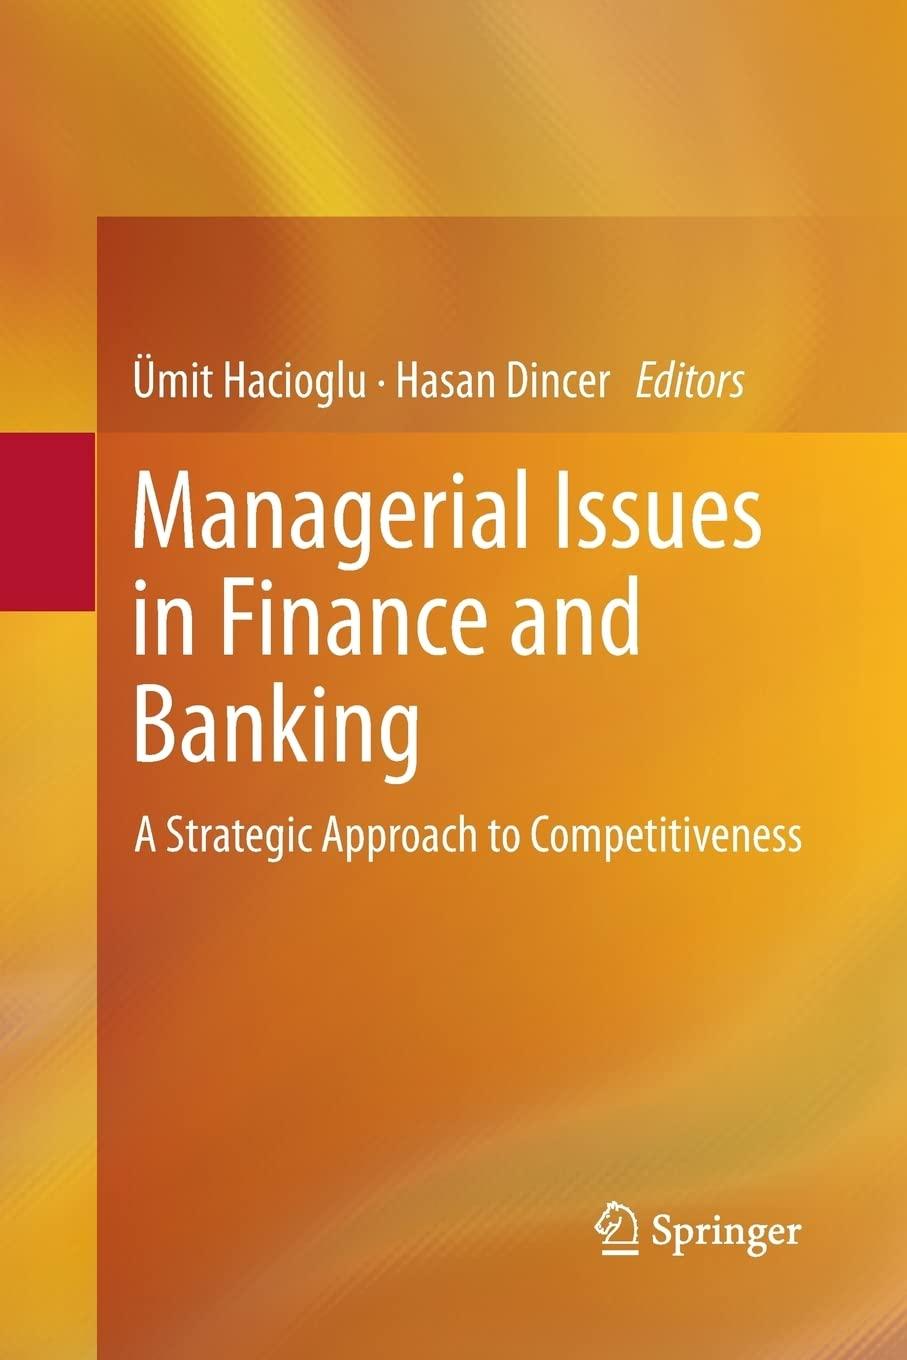 managerial issues in finance and banking a strategic approach to competitiveness 1st edition Ümit hacioglu,